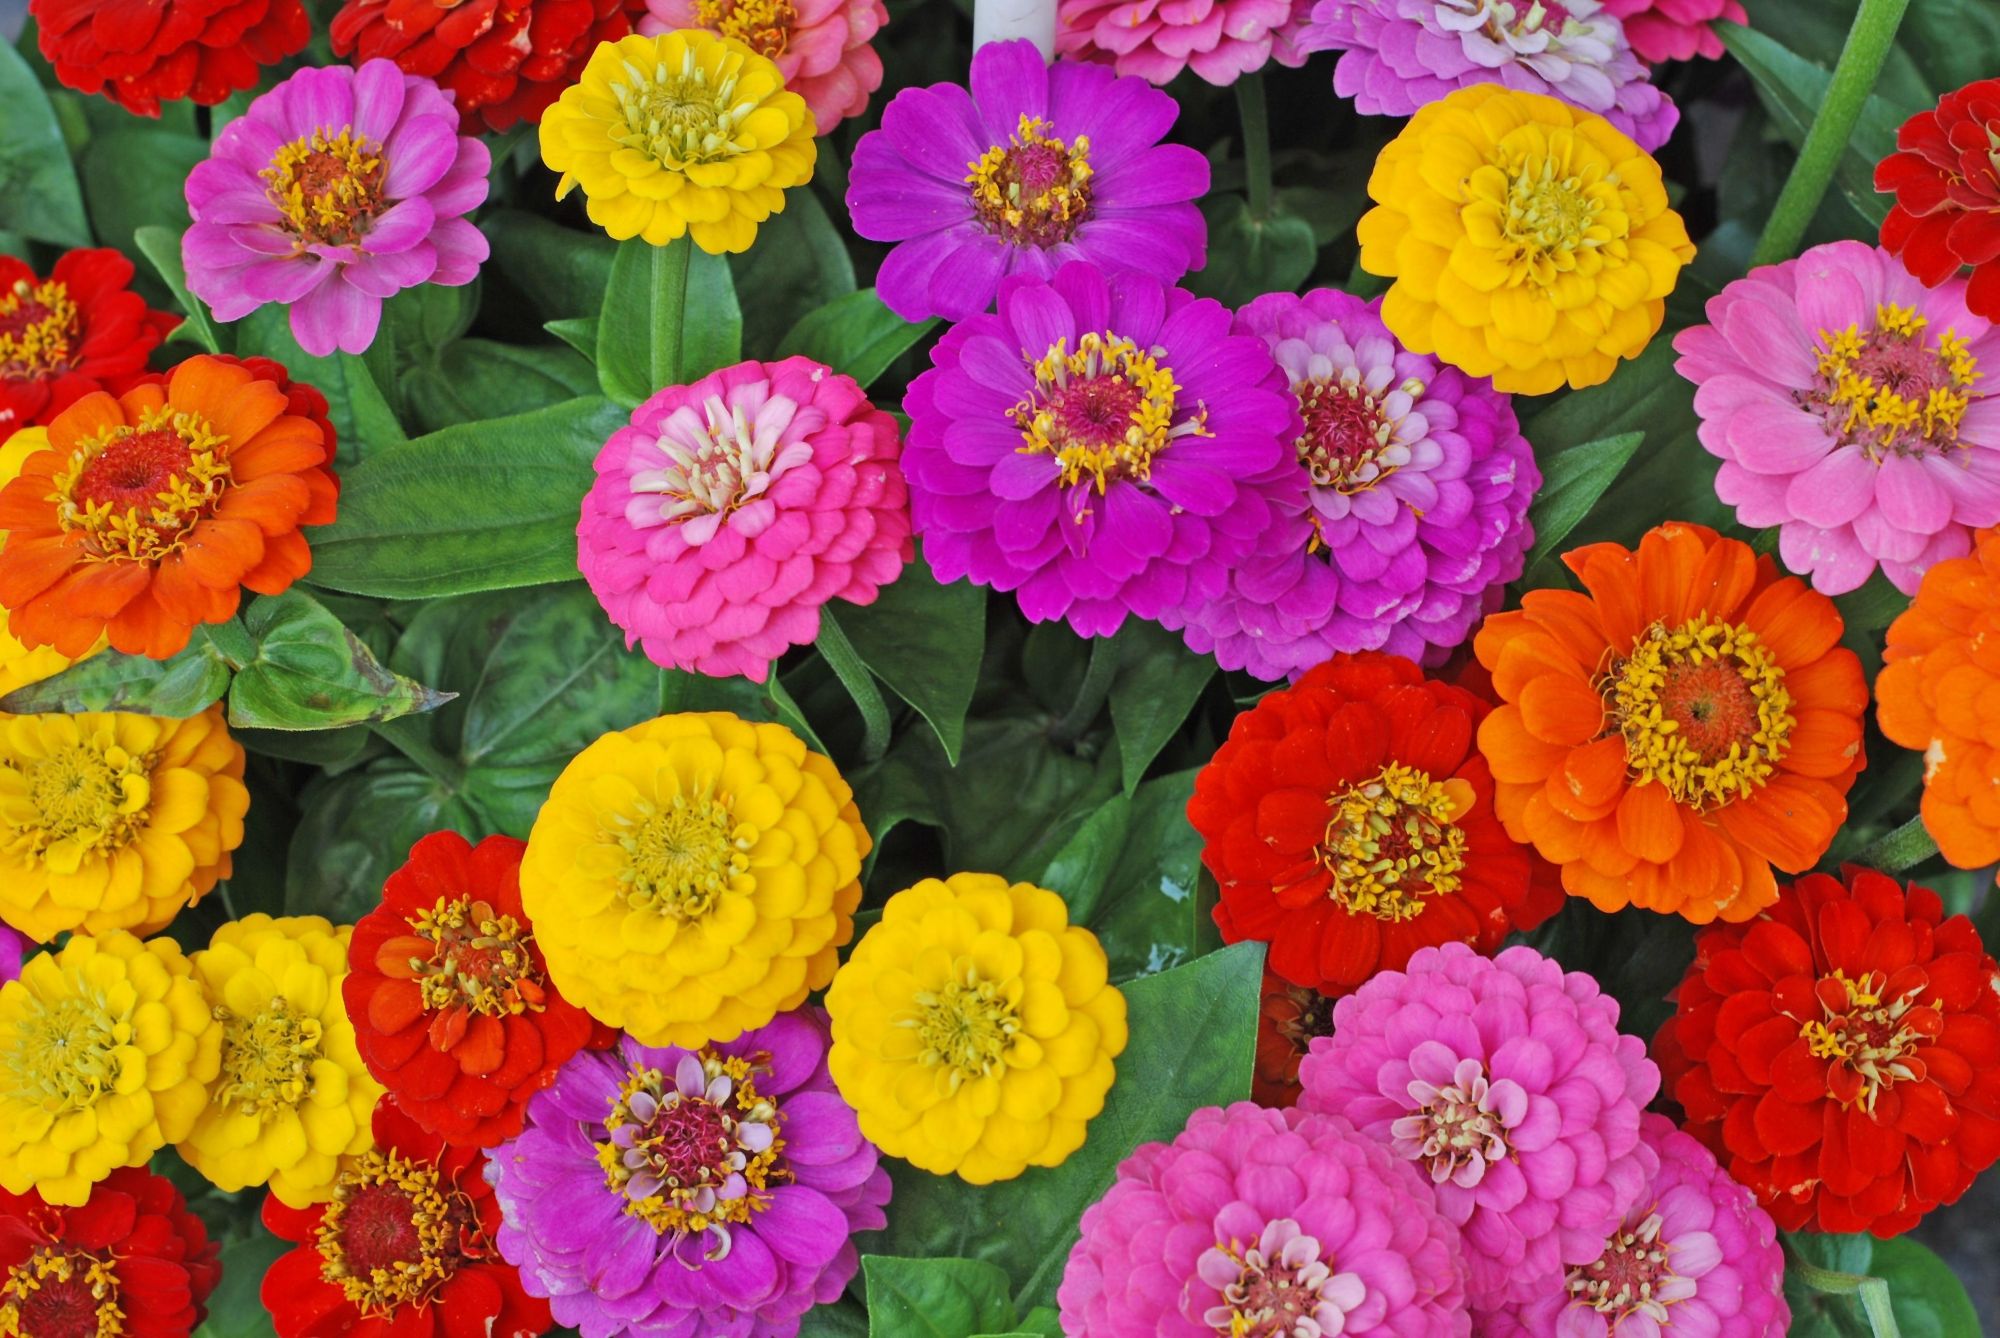 Different colored zinnias in a garden